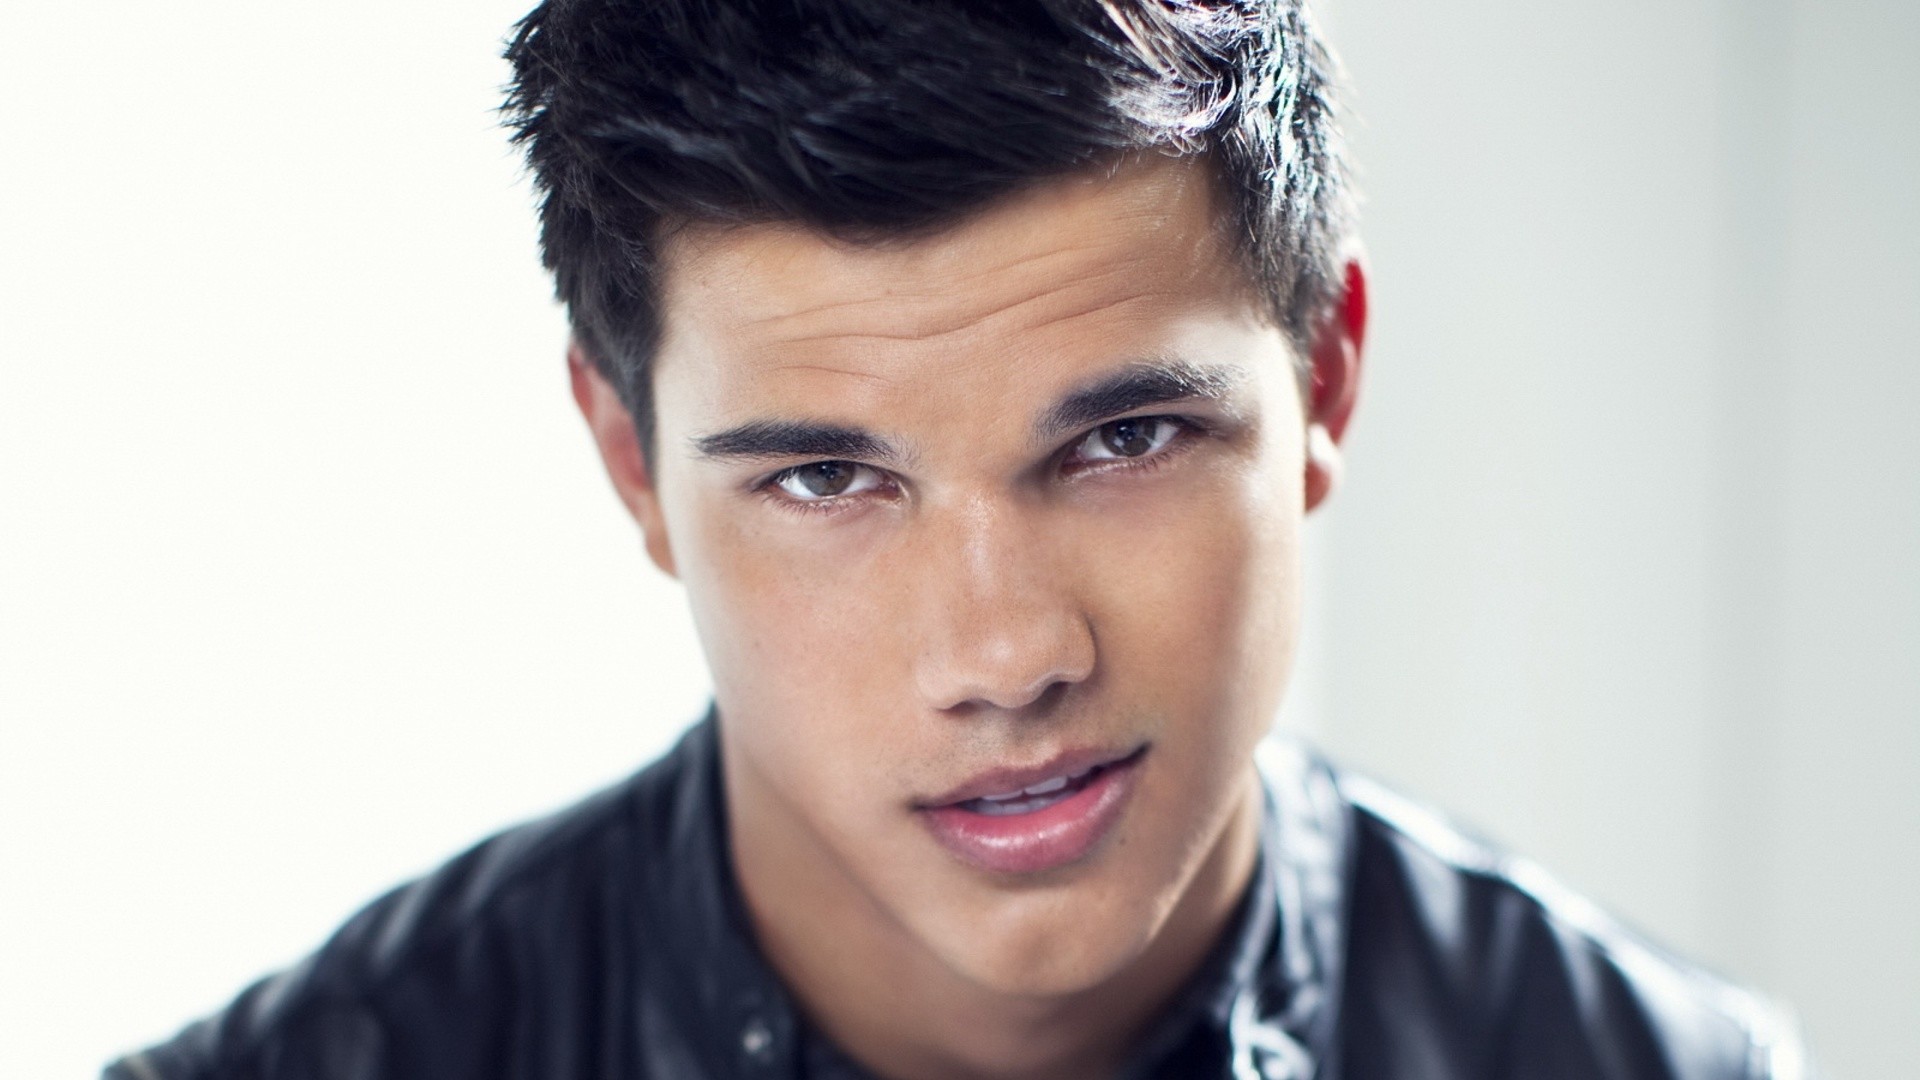 Taylor Lautner Actor Face 1920x1080